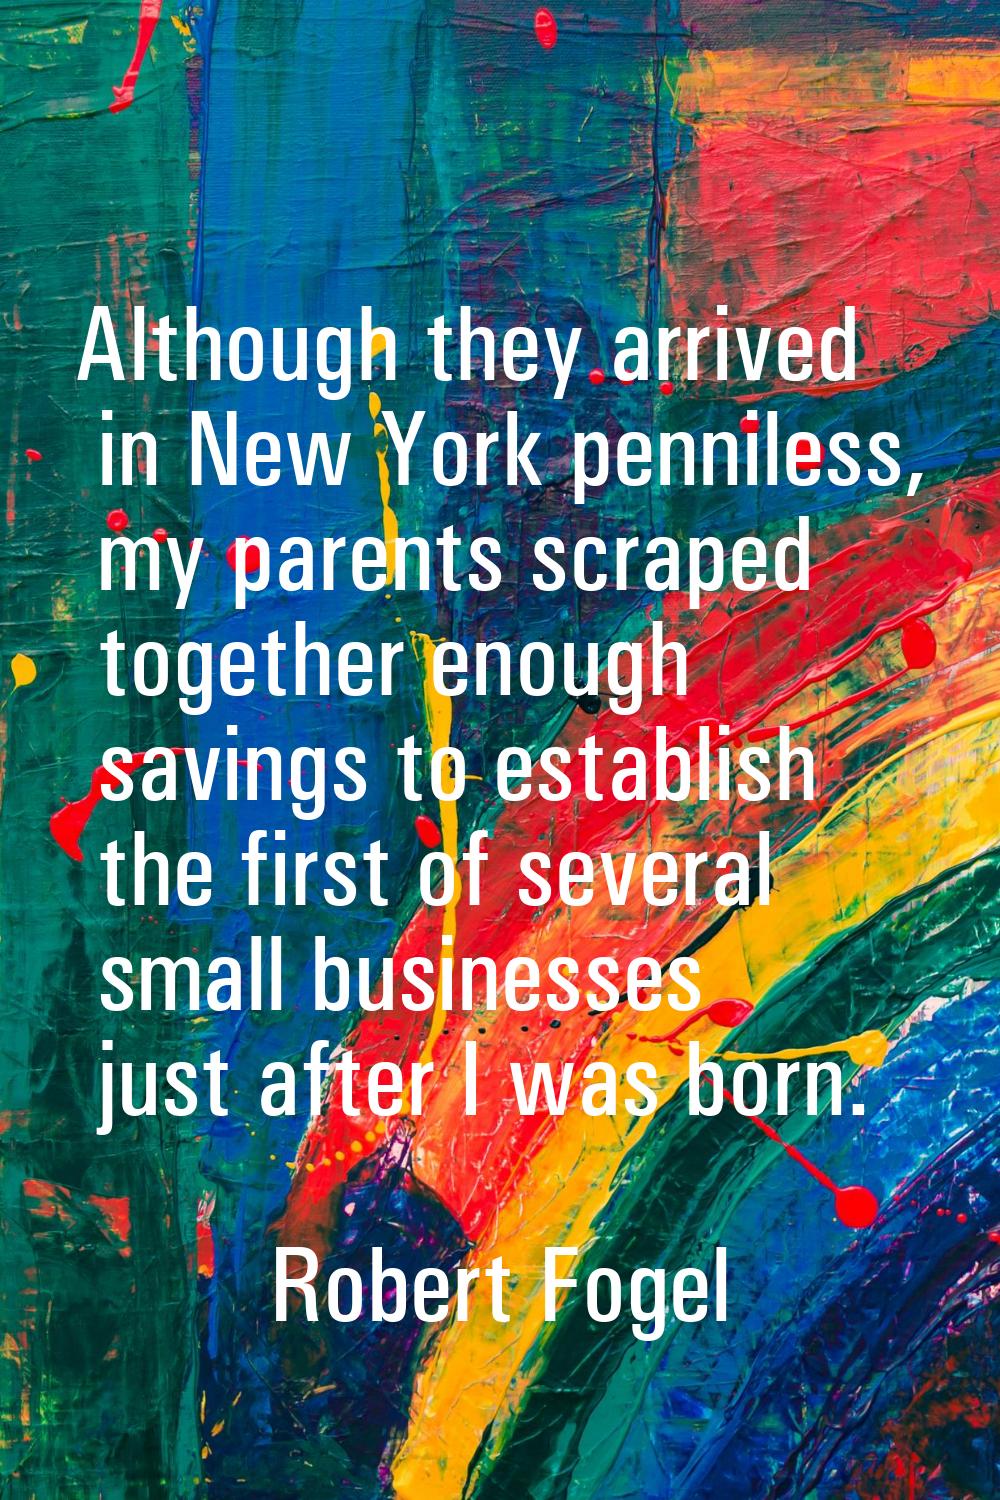 Although they arrived in New York penniless, my parents scraped together enough savings to establis